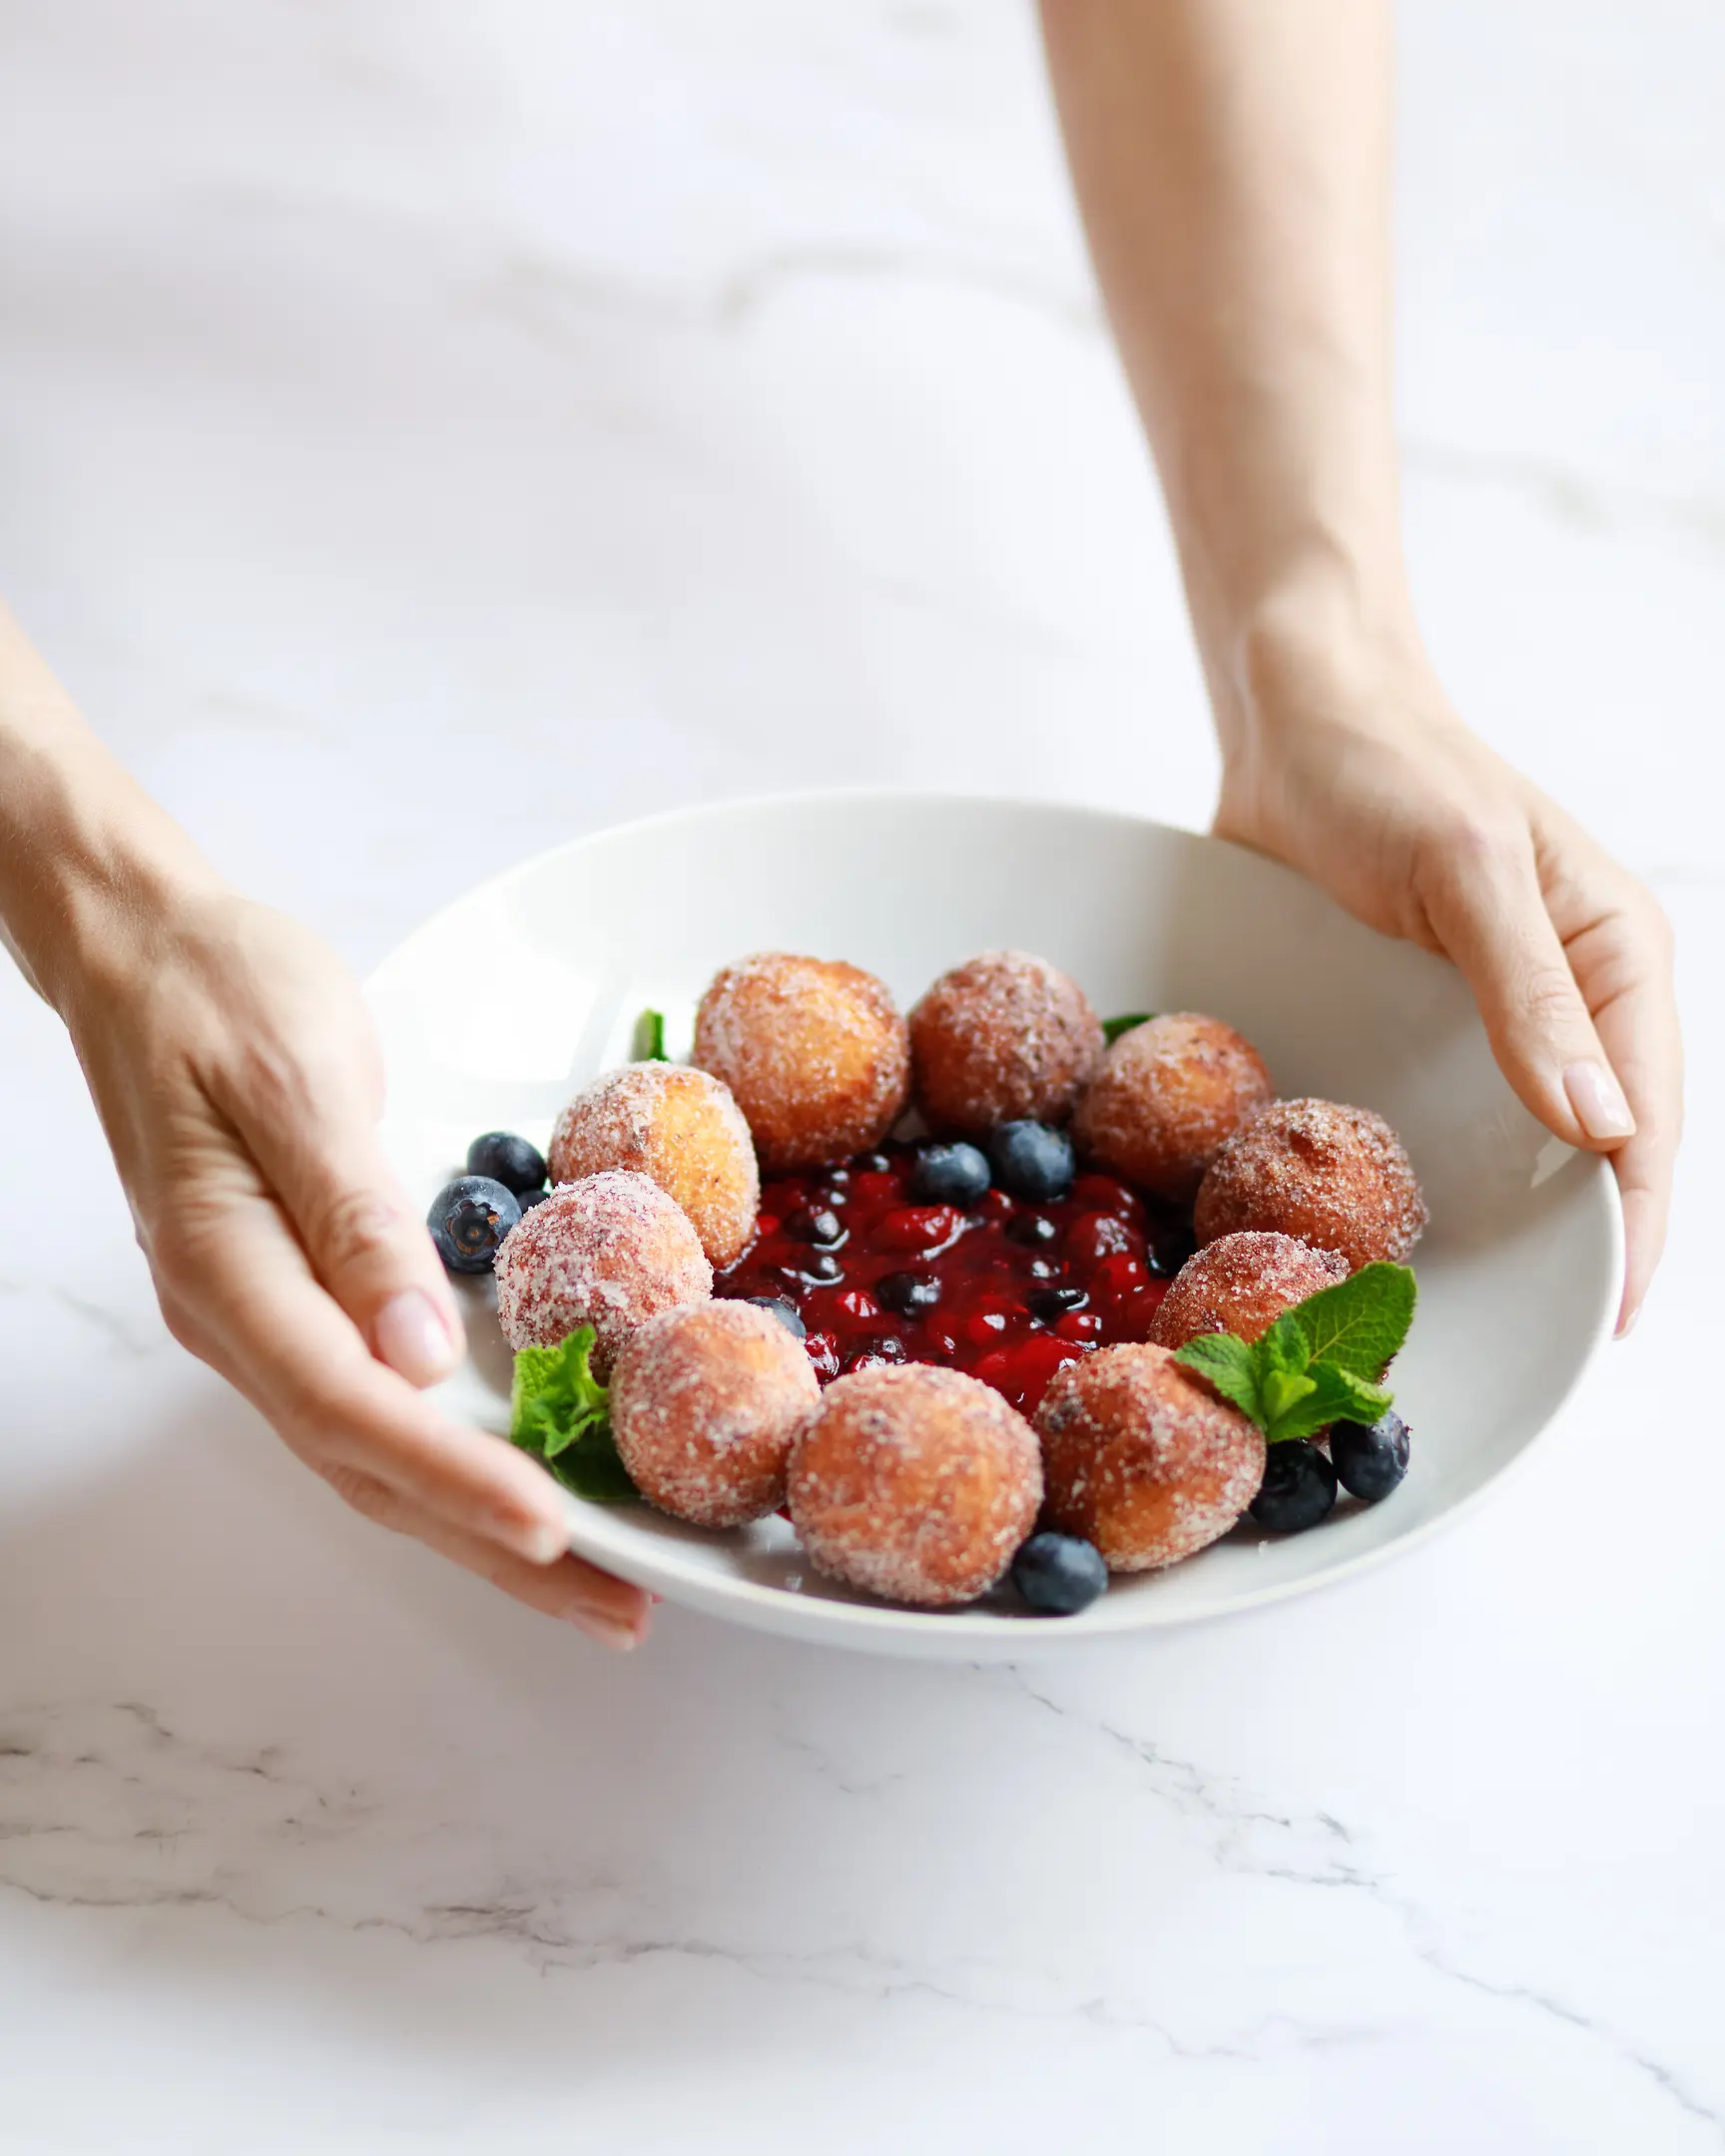 A woman holding plate with donuts and berries jam in her hands. A woman holding a plate with donuts and berries jam in her hands.